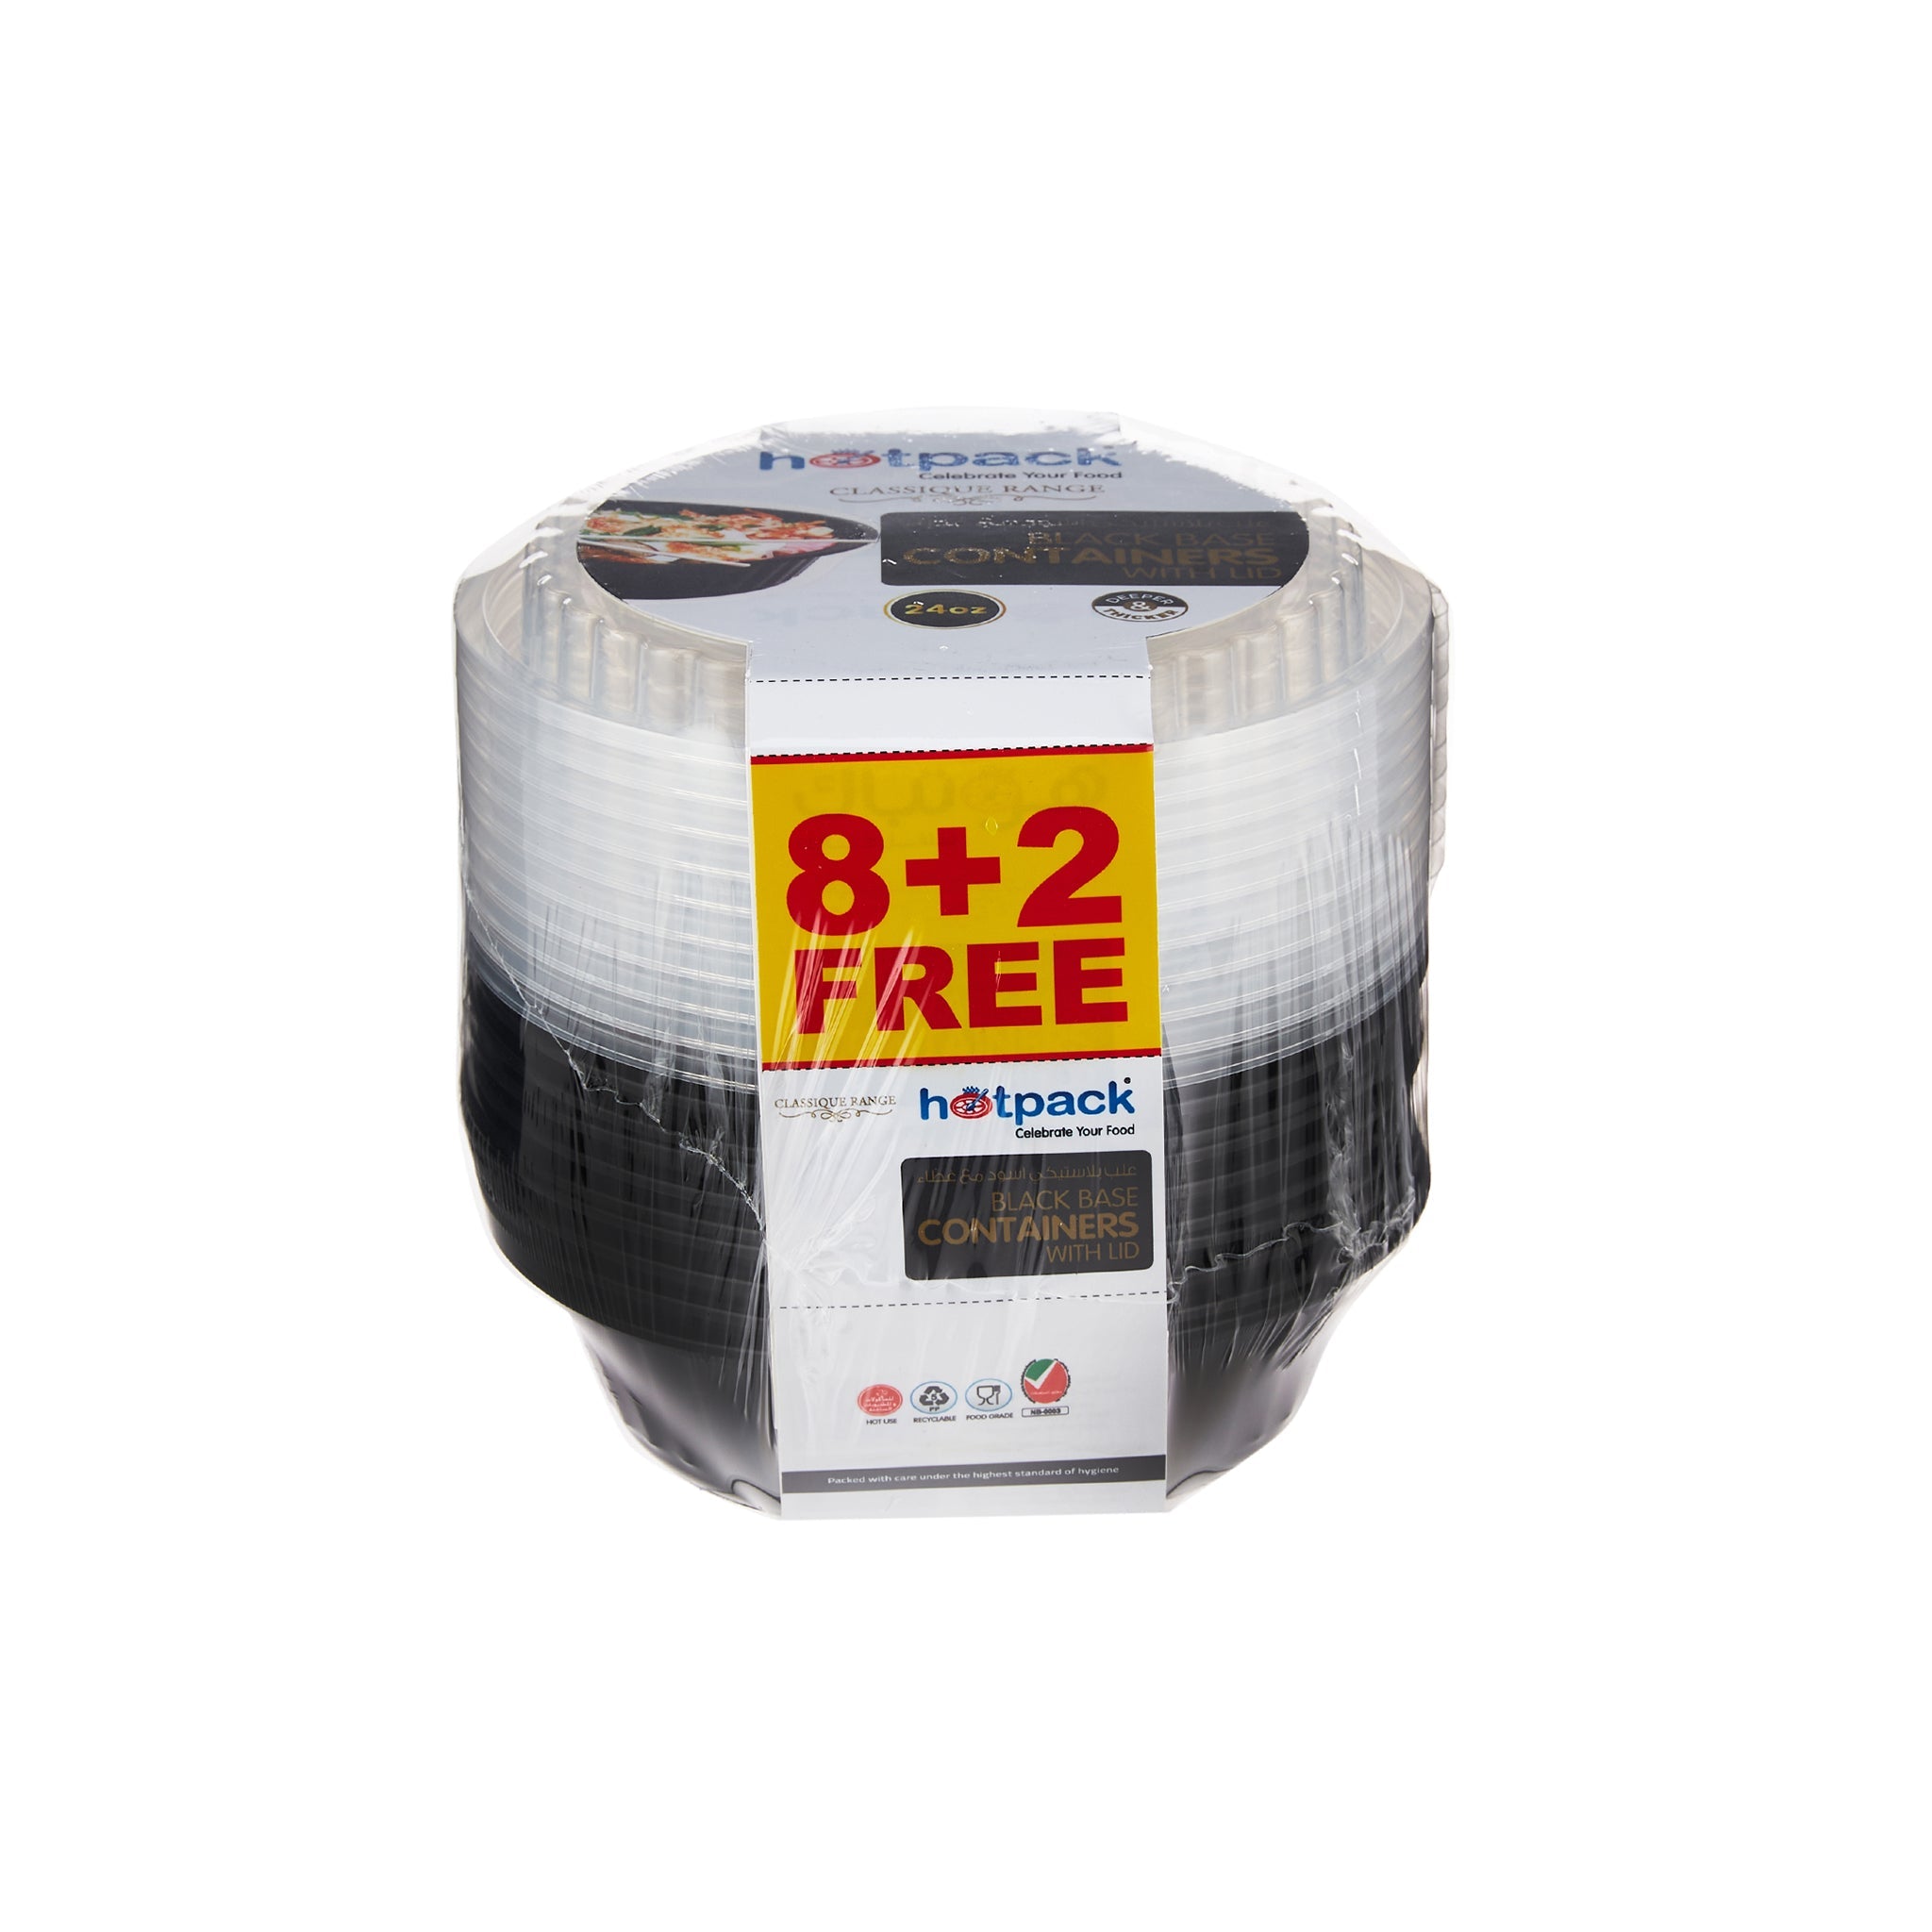 8+2 Offer Black Base Round Container 24 oz - Hotpack Oman